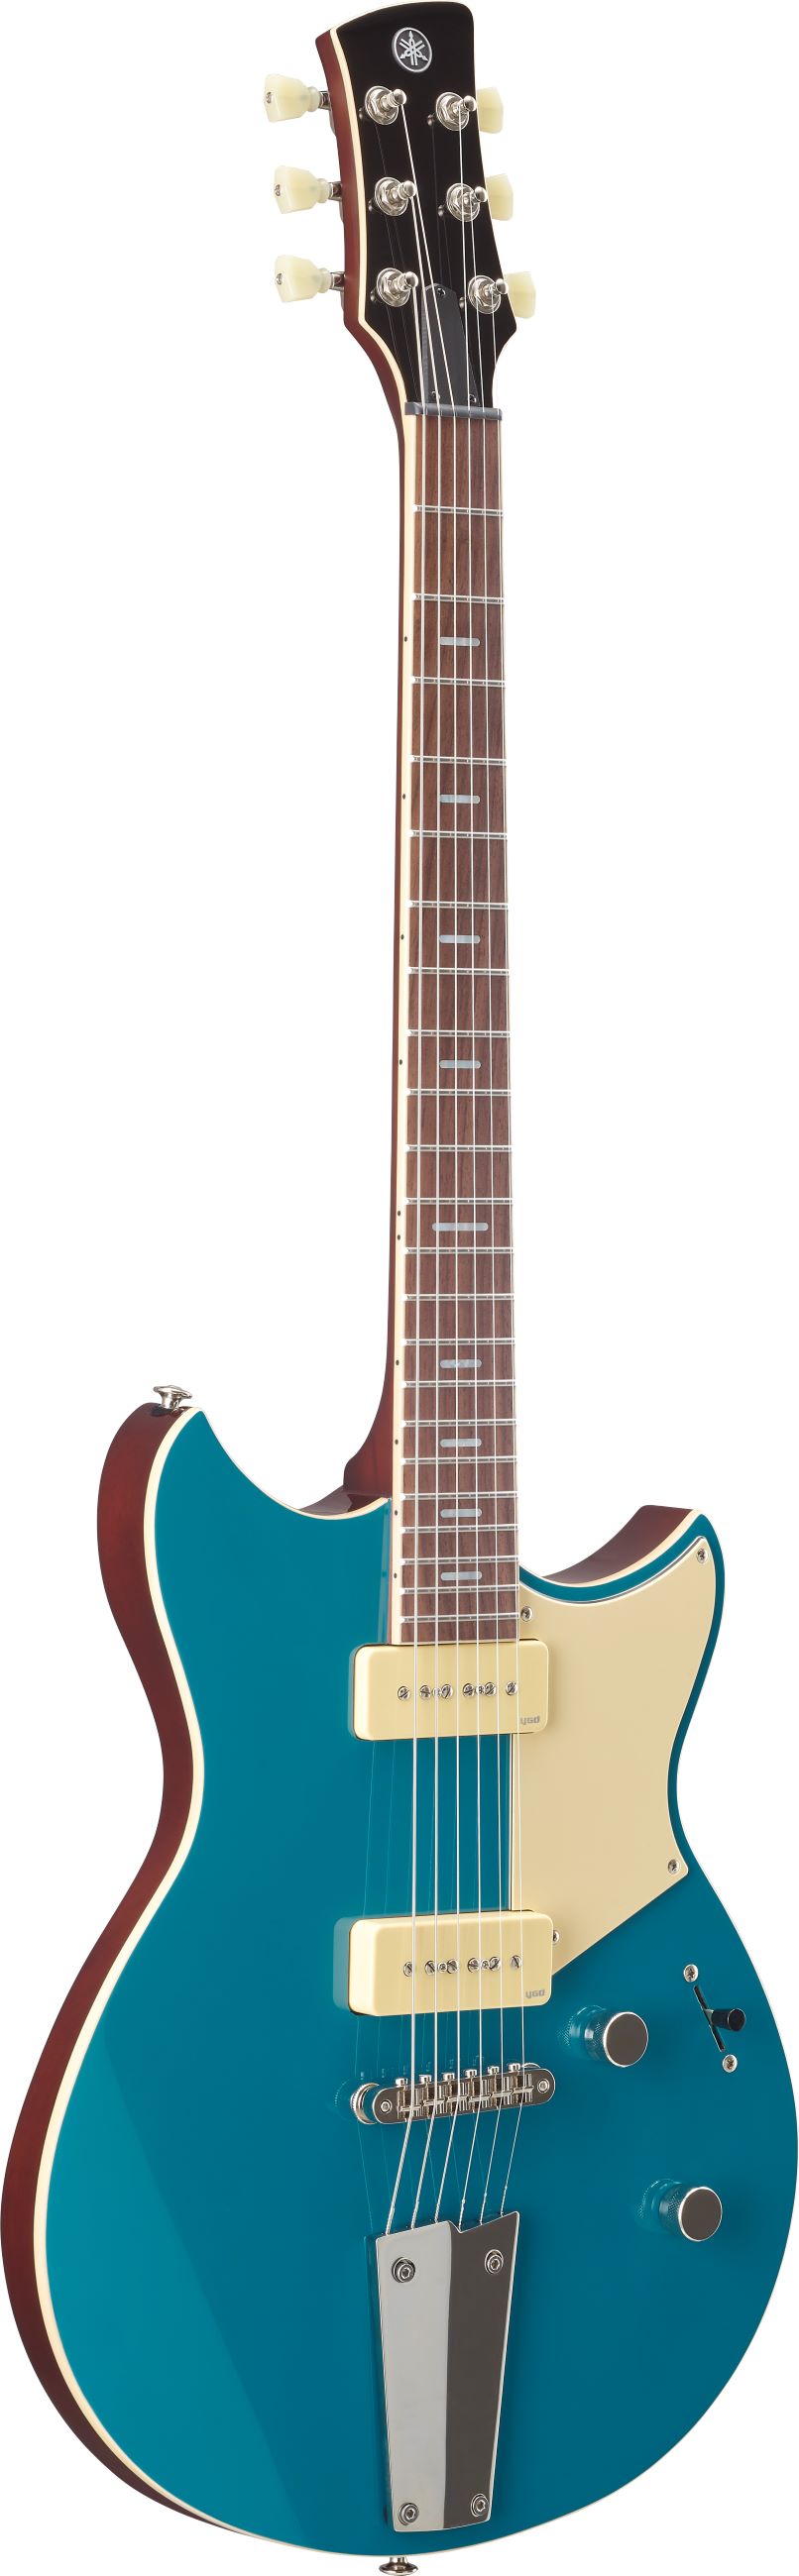 Revstar Professional RSP02T Electric Guitar in Swift Blue